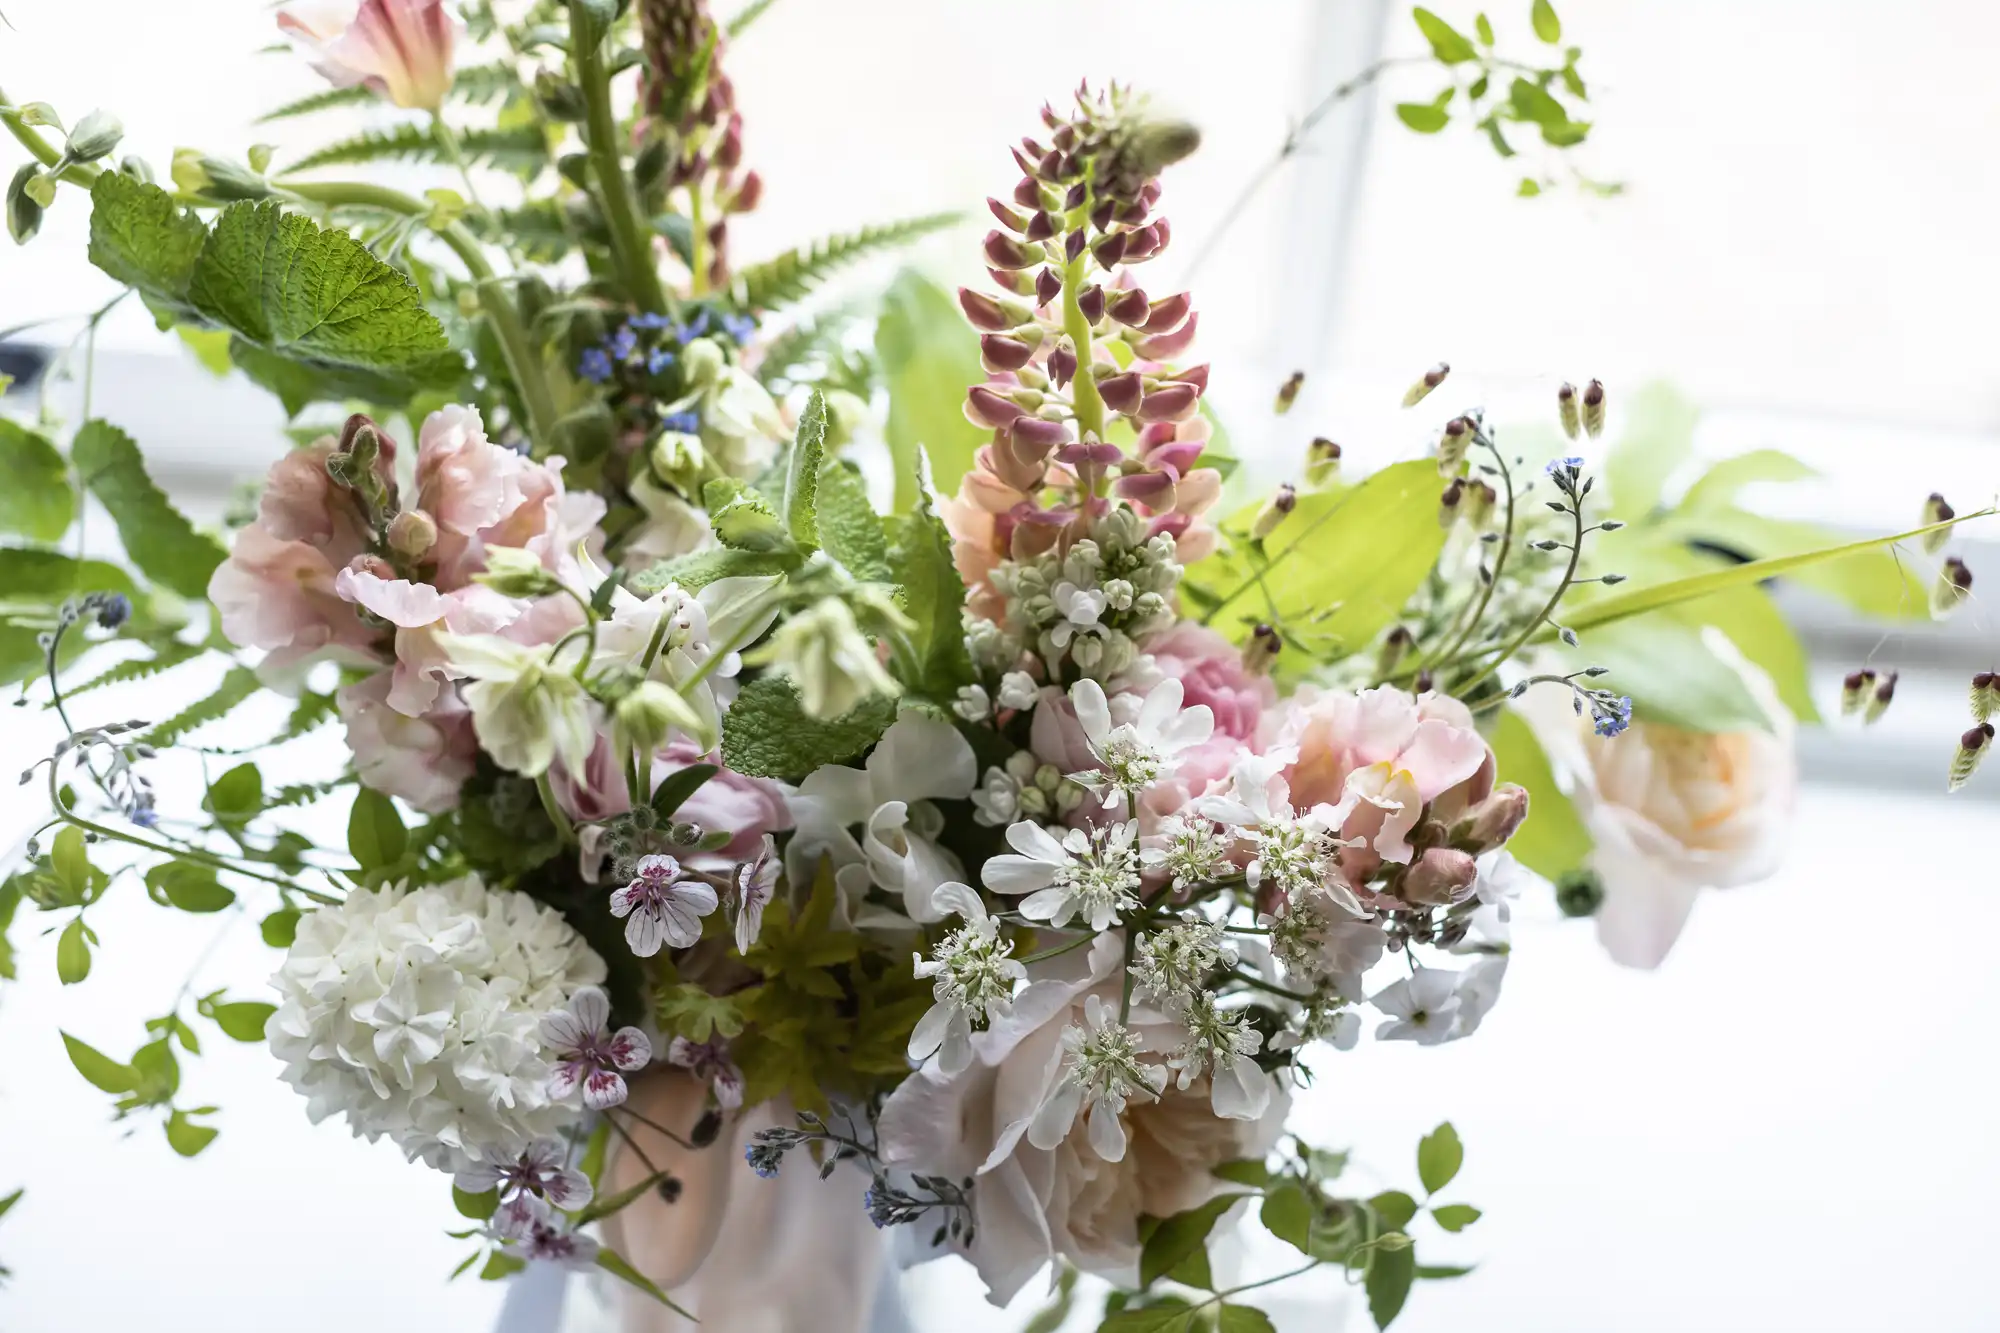 A close-up of a vibrant bouquet featuring various flowers including pink blossoms and lush greenery.